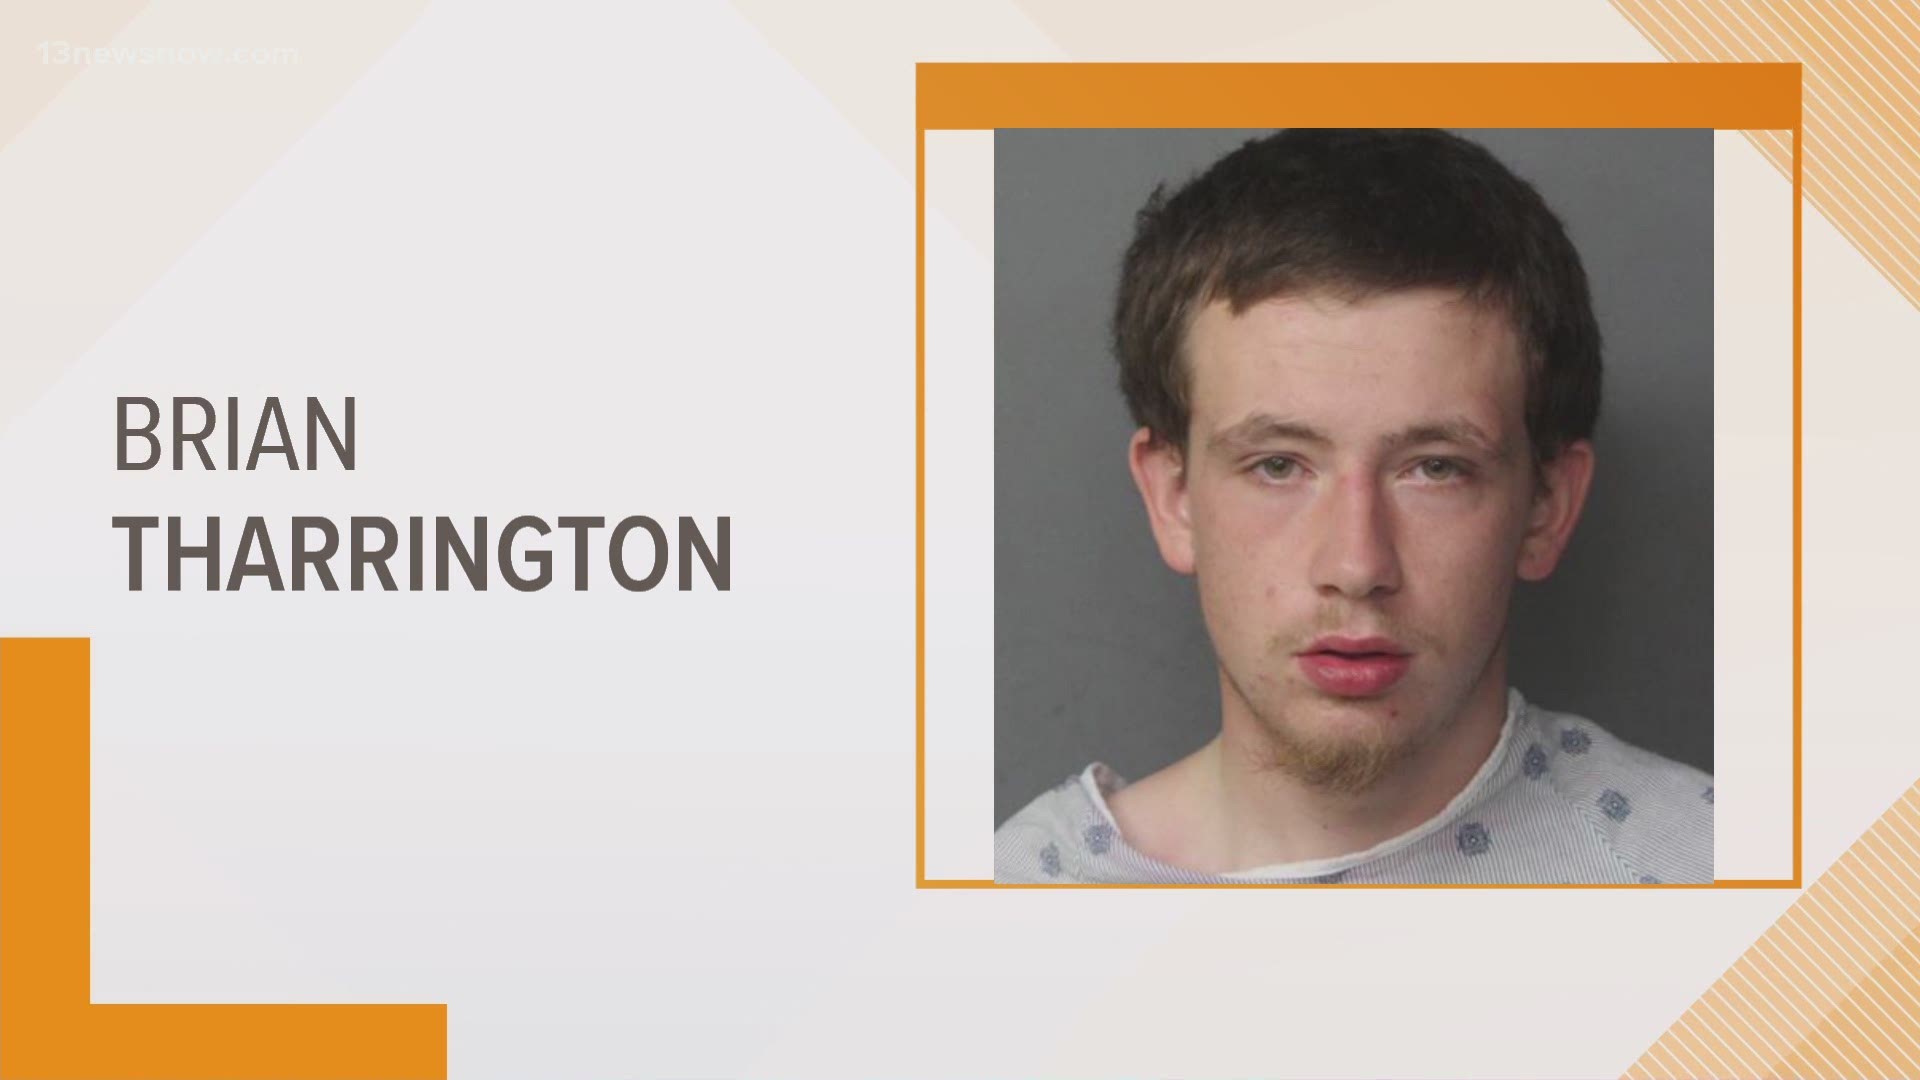 Brian Tharrington, 19, was arrested and charged in connection with the shooting death of a man that took place on Hickory Street in Norfolk.